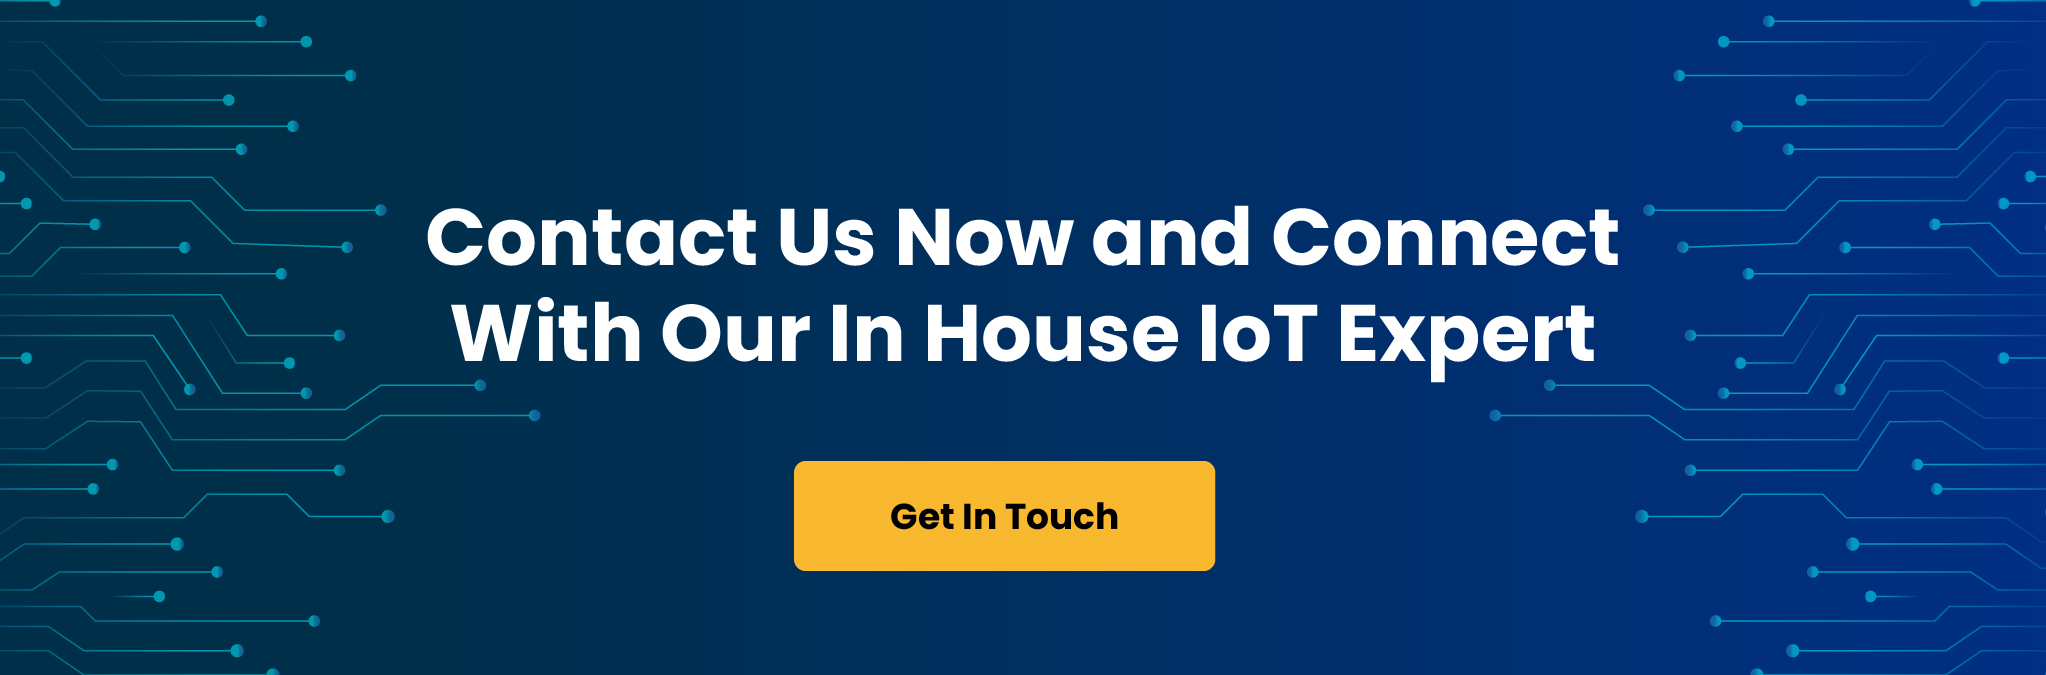 IoT across all the industries